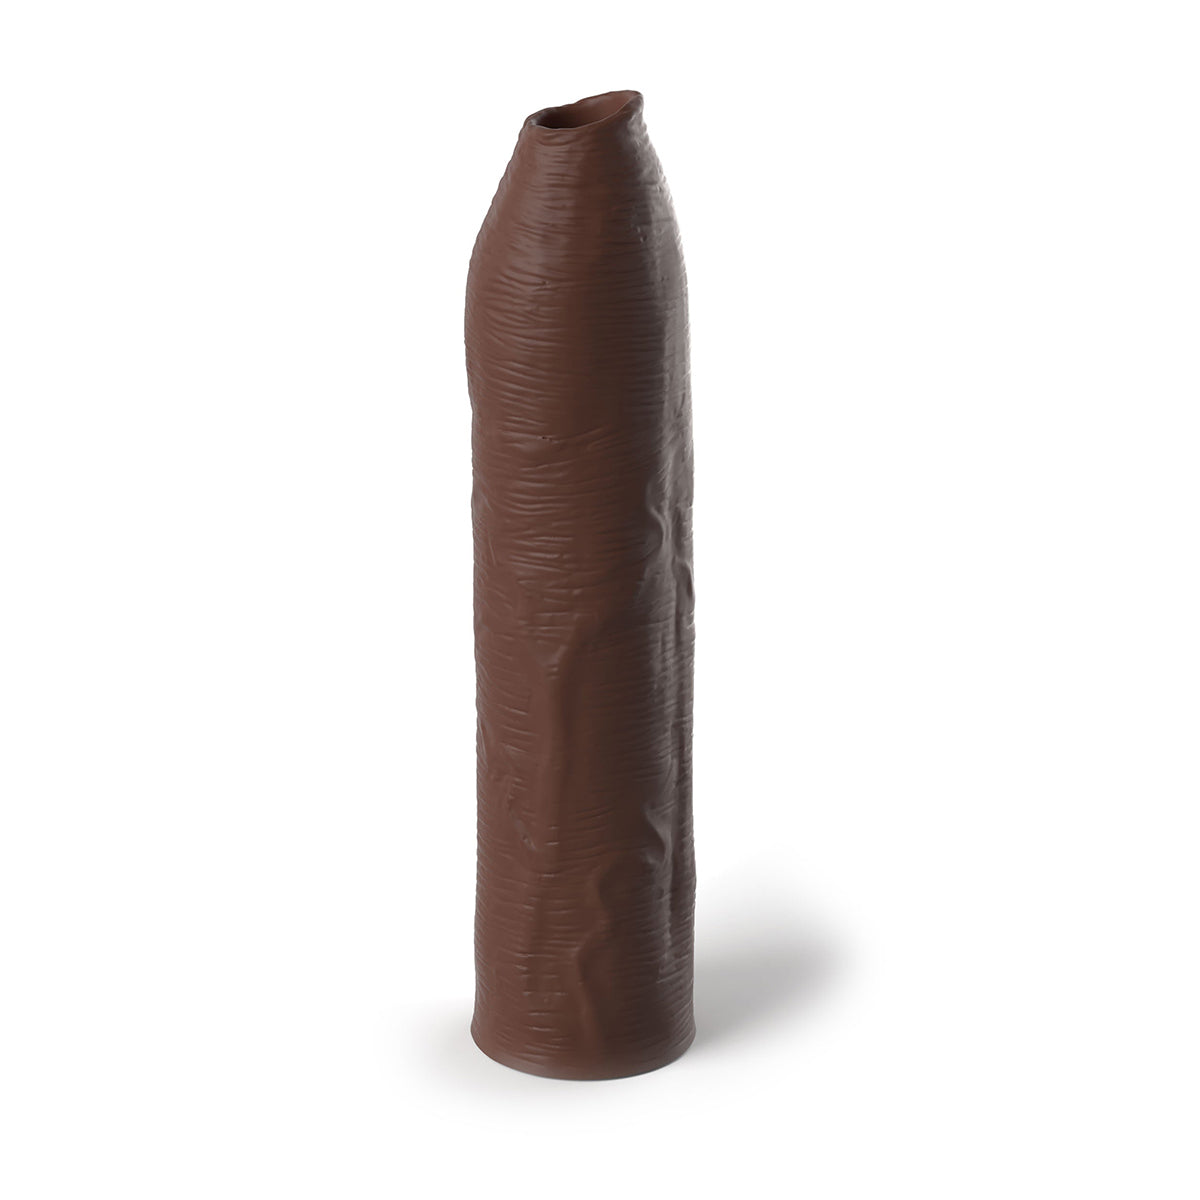 Uncut 7" Silicone Penis Enhancer - Brown - Thorn & Feather